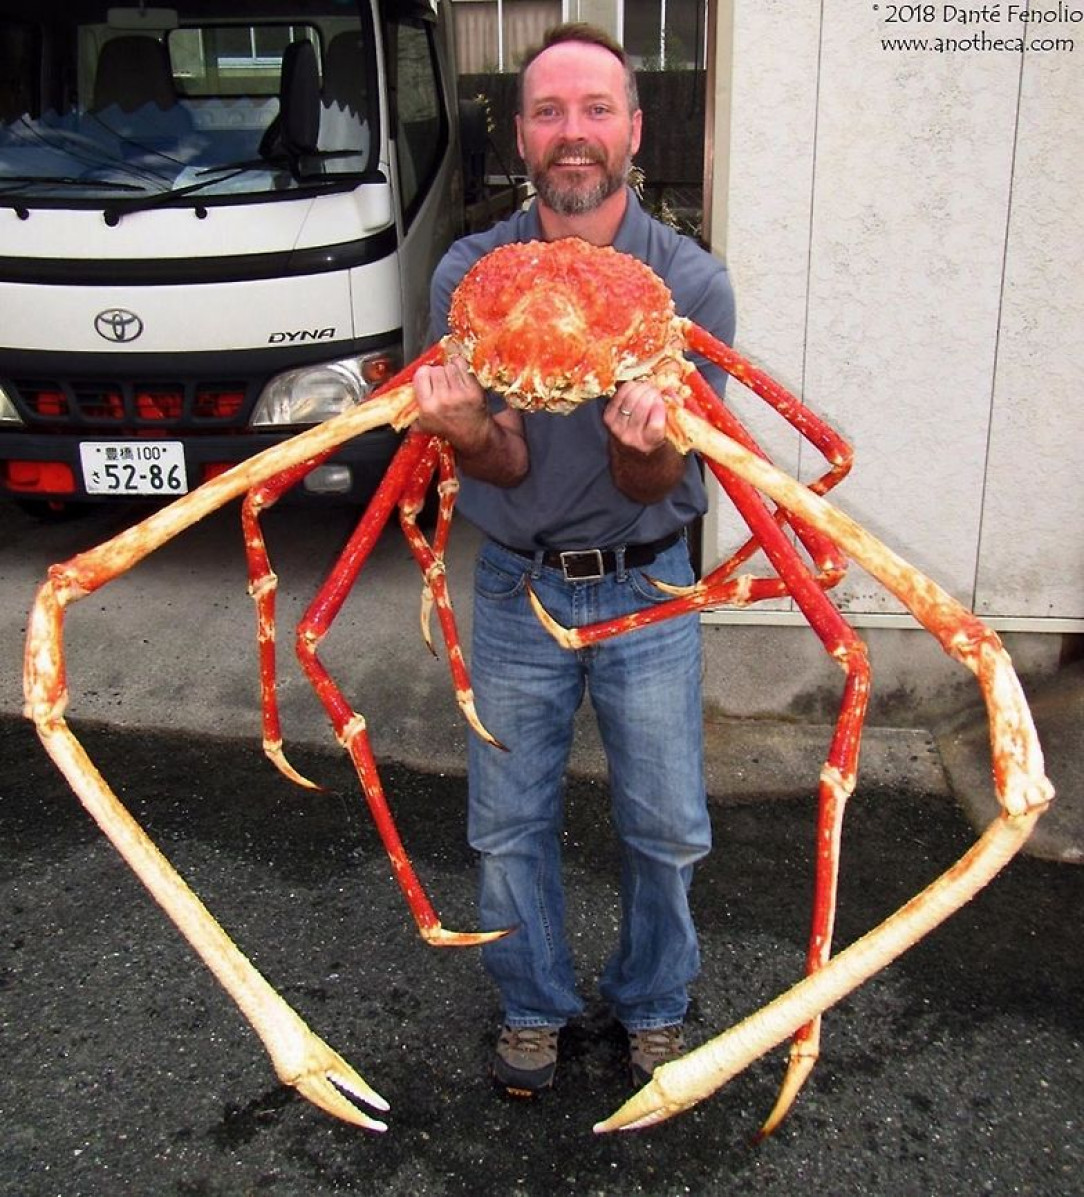 The Japanese Spider Crab can grow a legspan of up to 12 feet, the largest of any arthropod